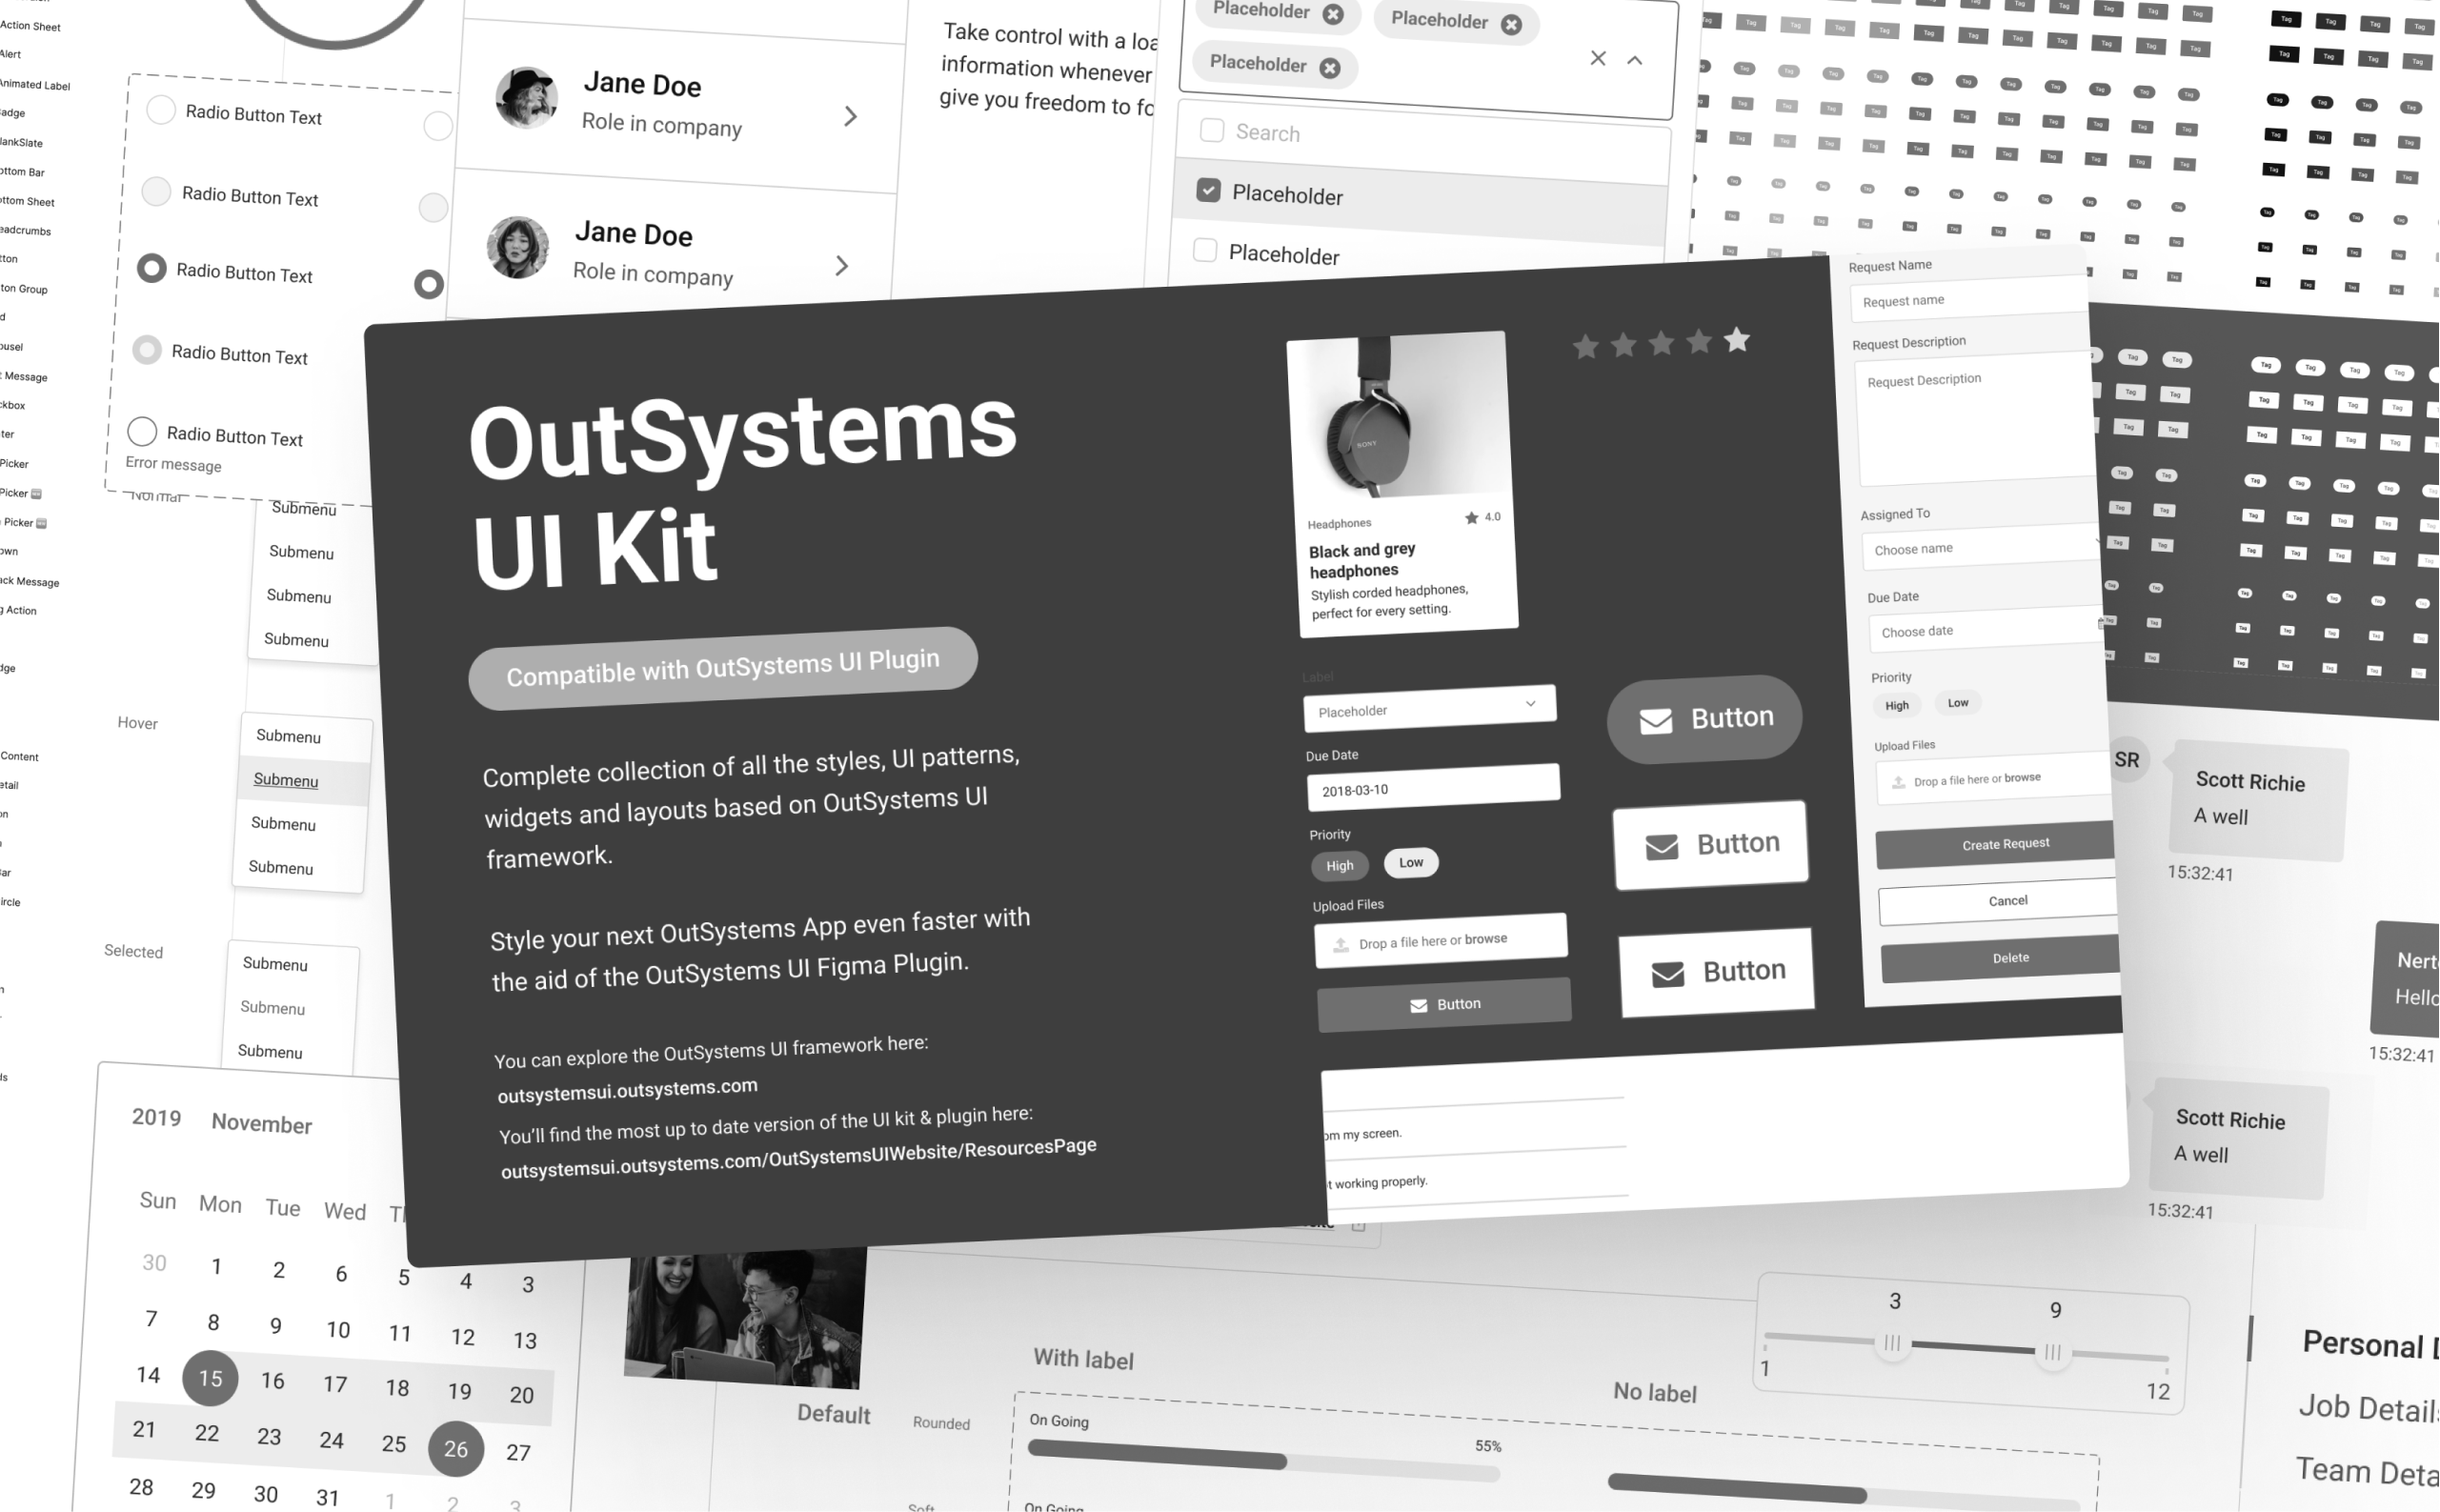 Thumbnail of the OutSystems UI Kit floating above a collage of dozens of design patterns like a calendar range picker, tag variations, radio buttons and more, all in black and white.